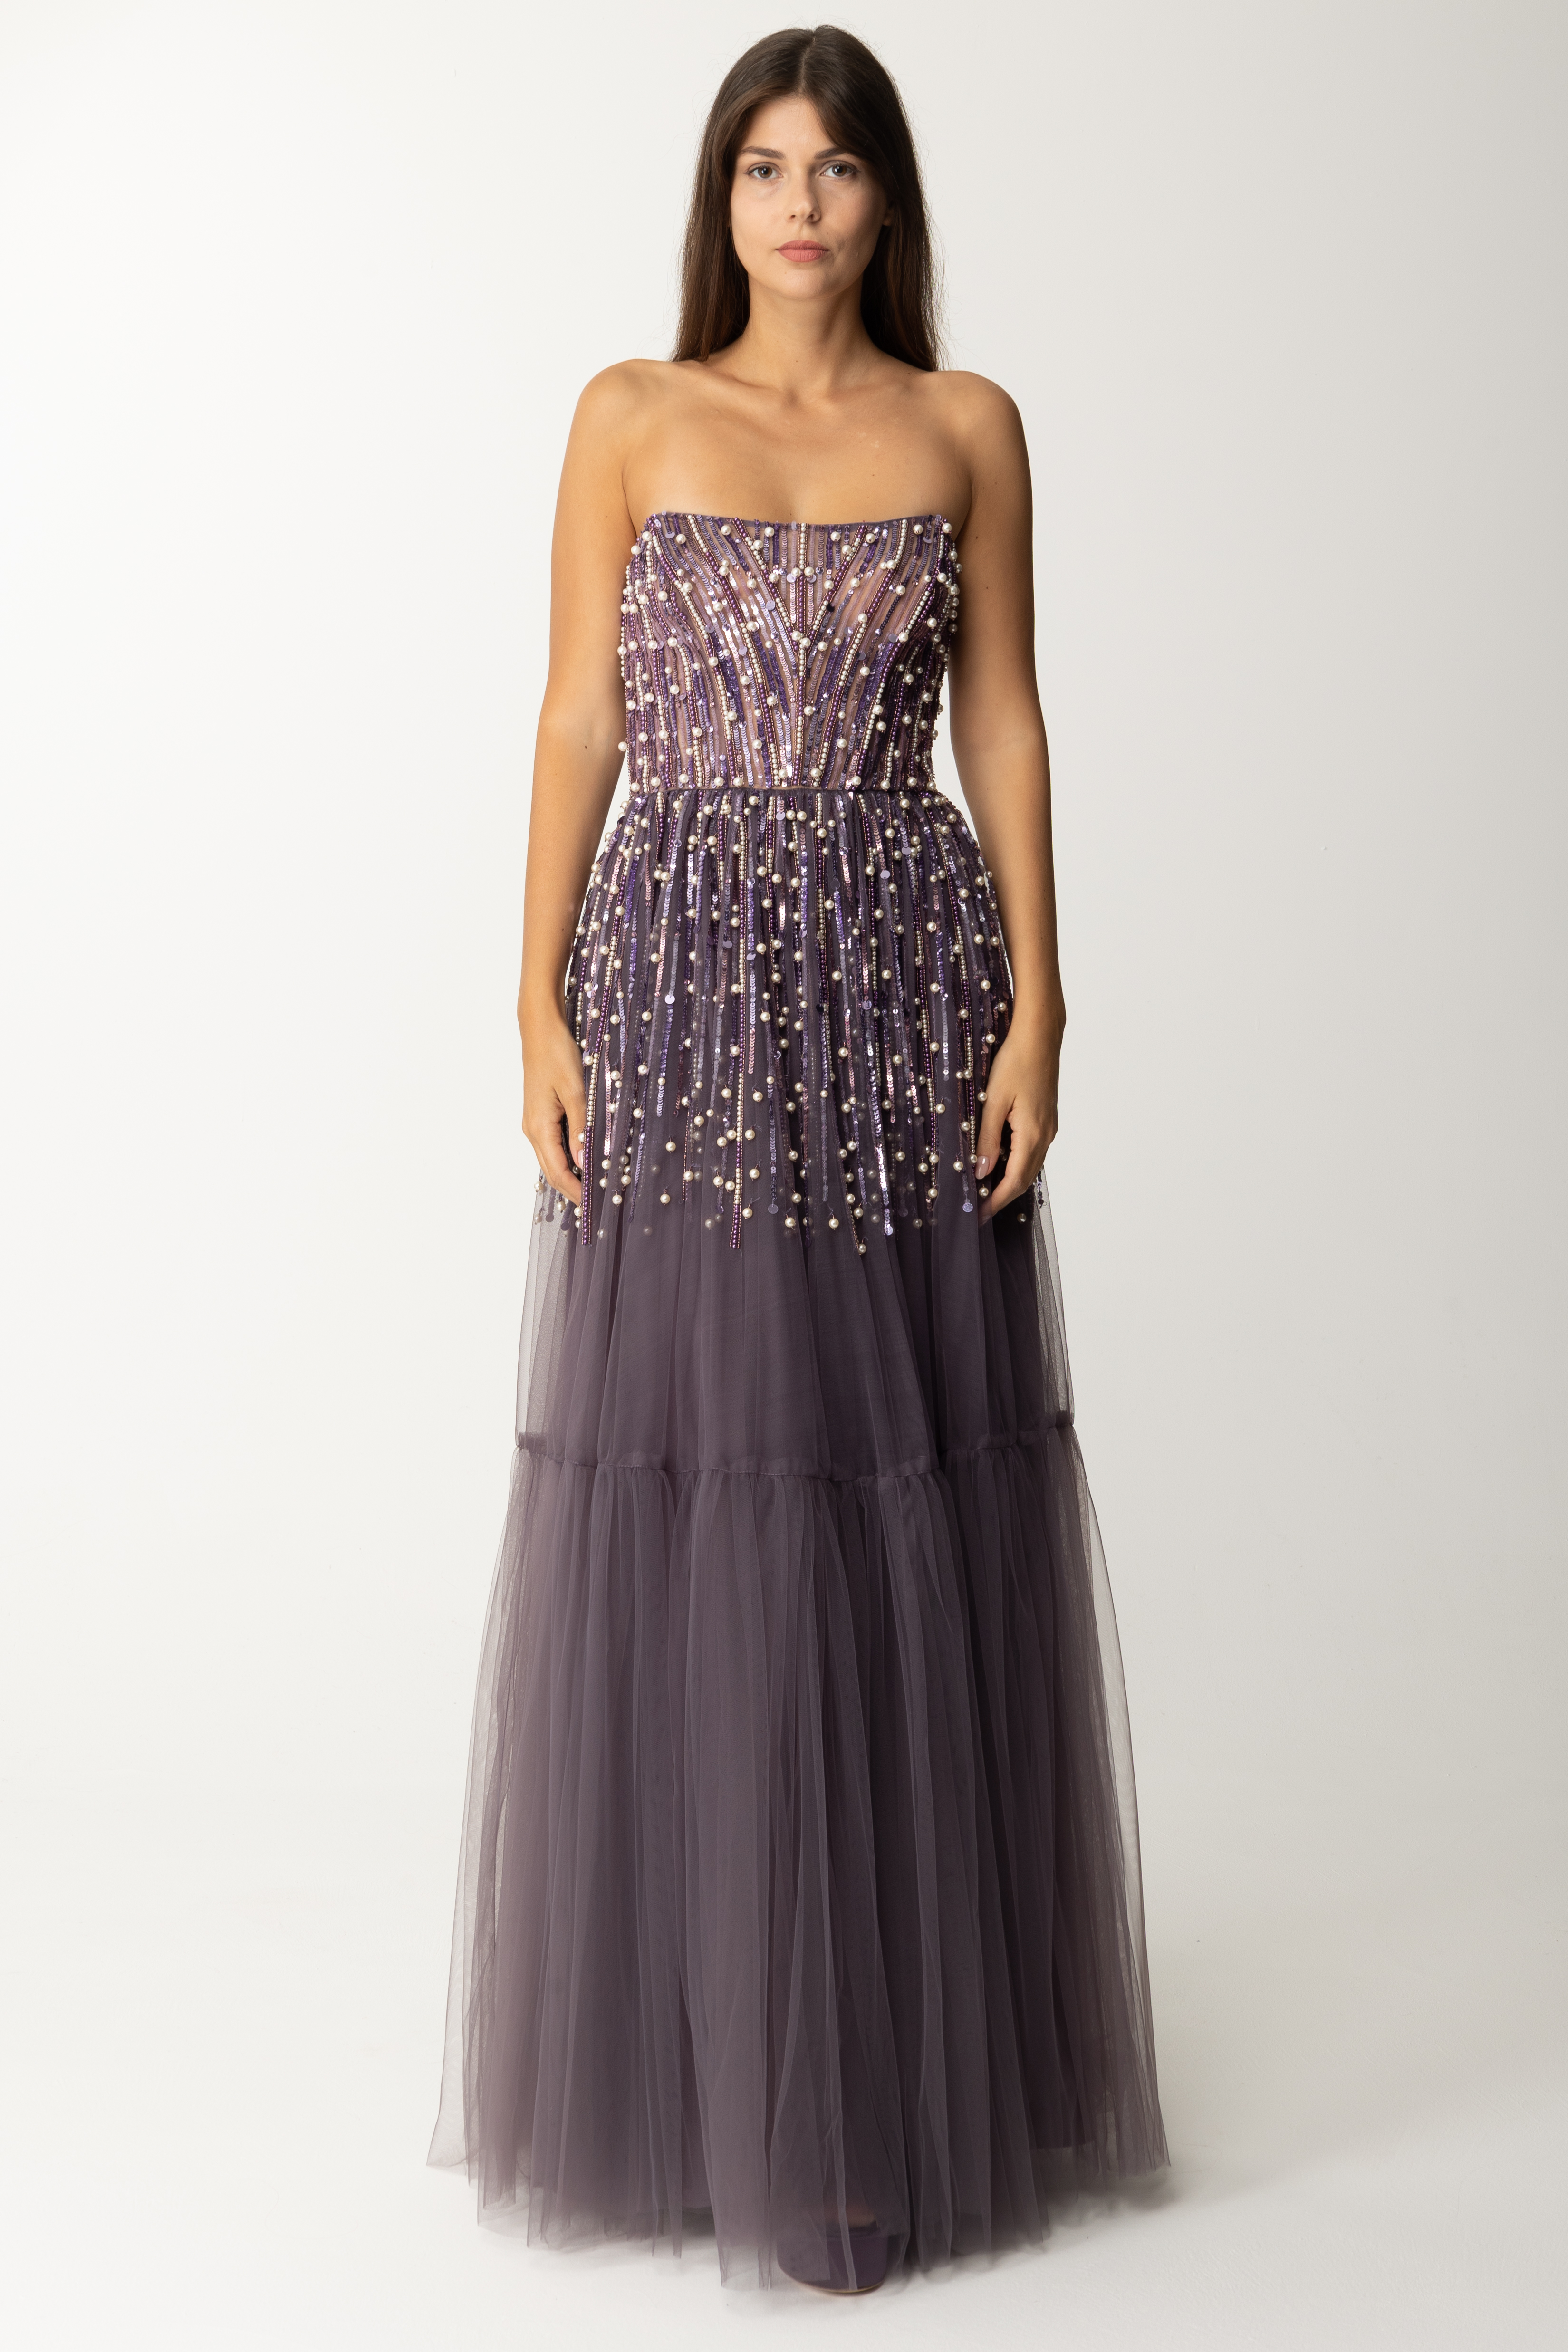 Preview: Elisabetta Franchi Red Carpet dress with sequin embroidery CANDY VIOLET